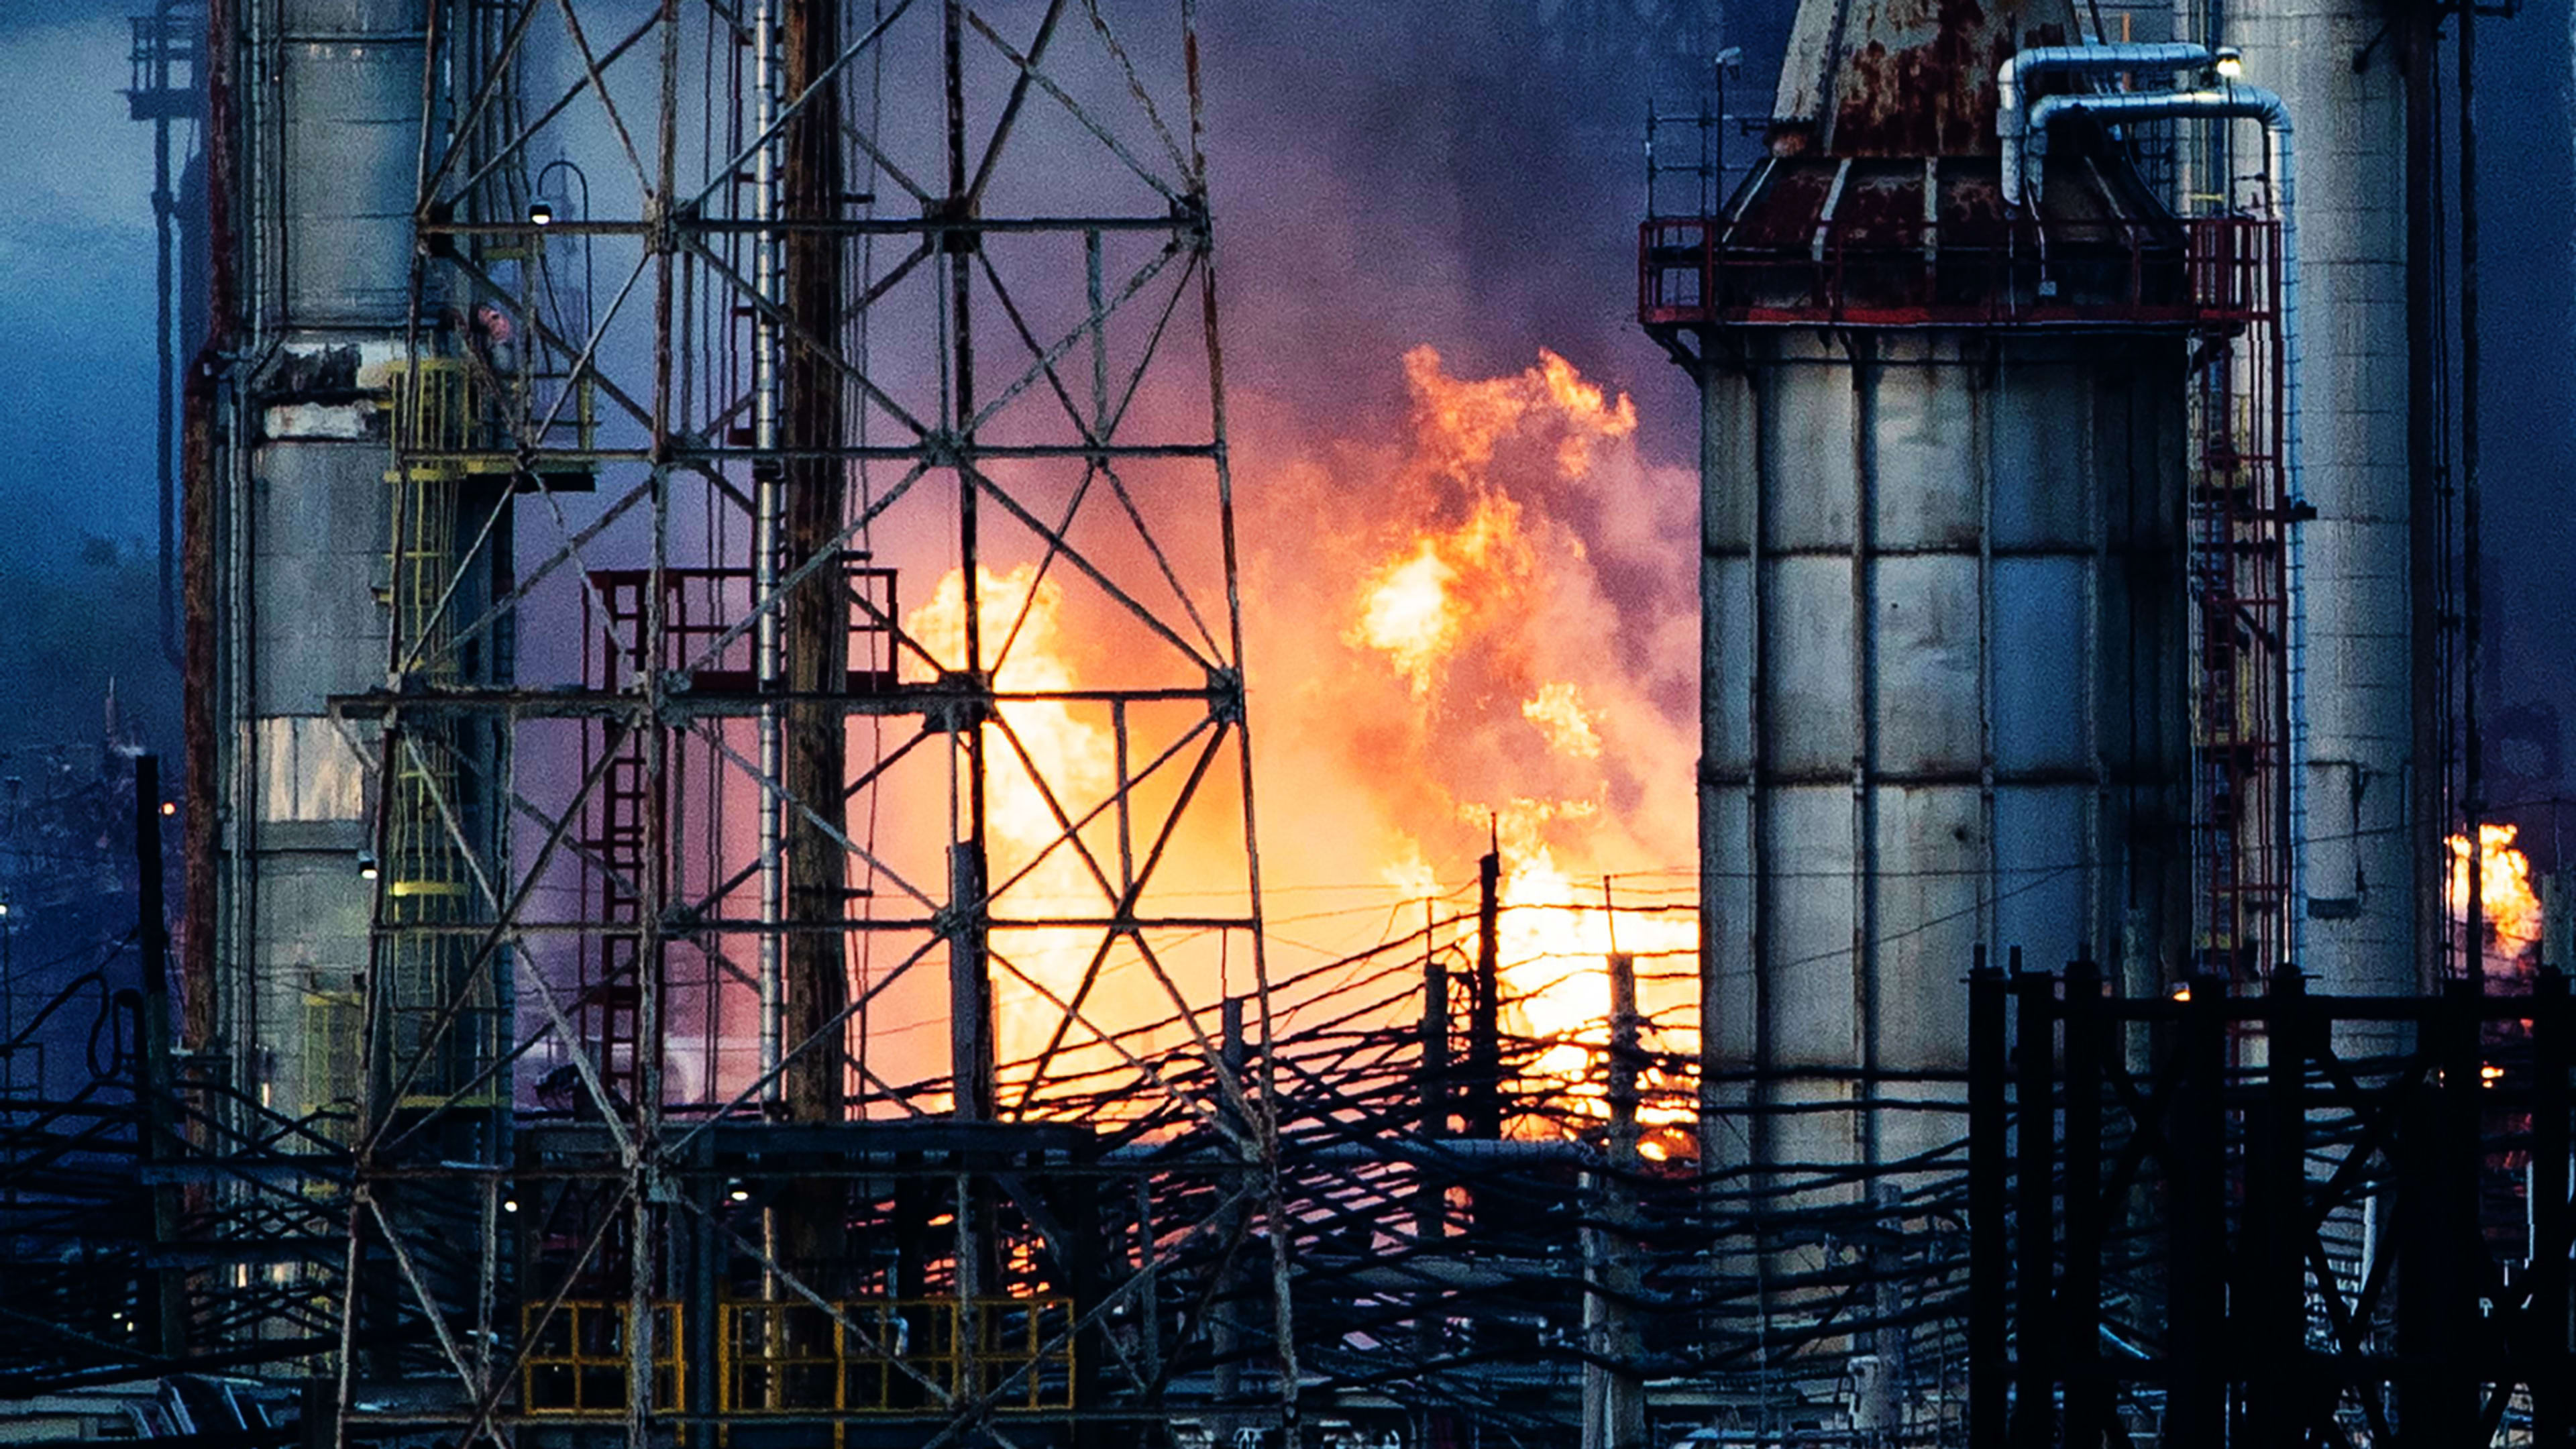 The Philadelphia oil refinery explosion was so big, it could be seen from space